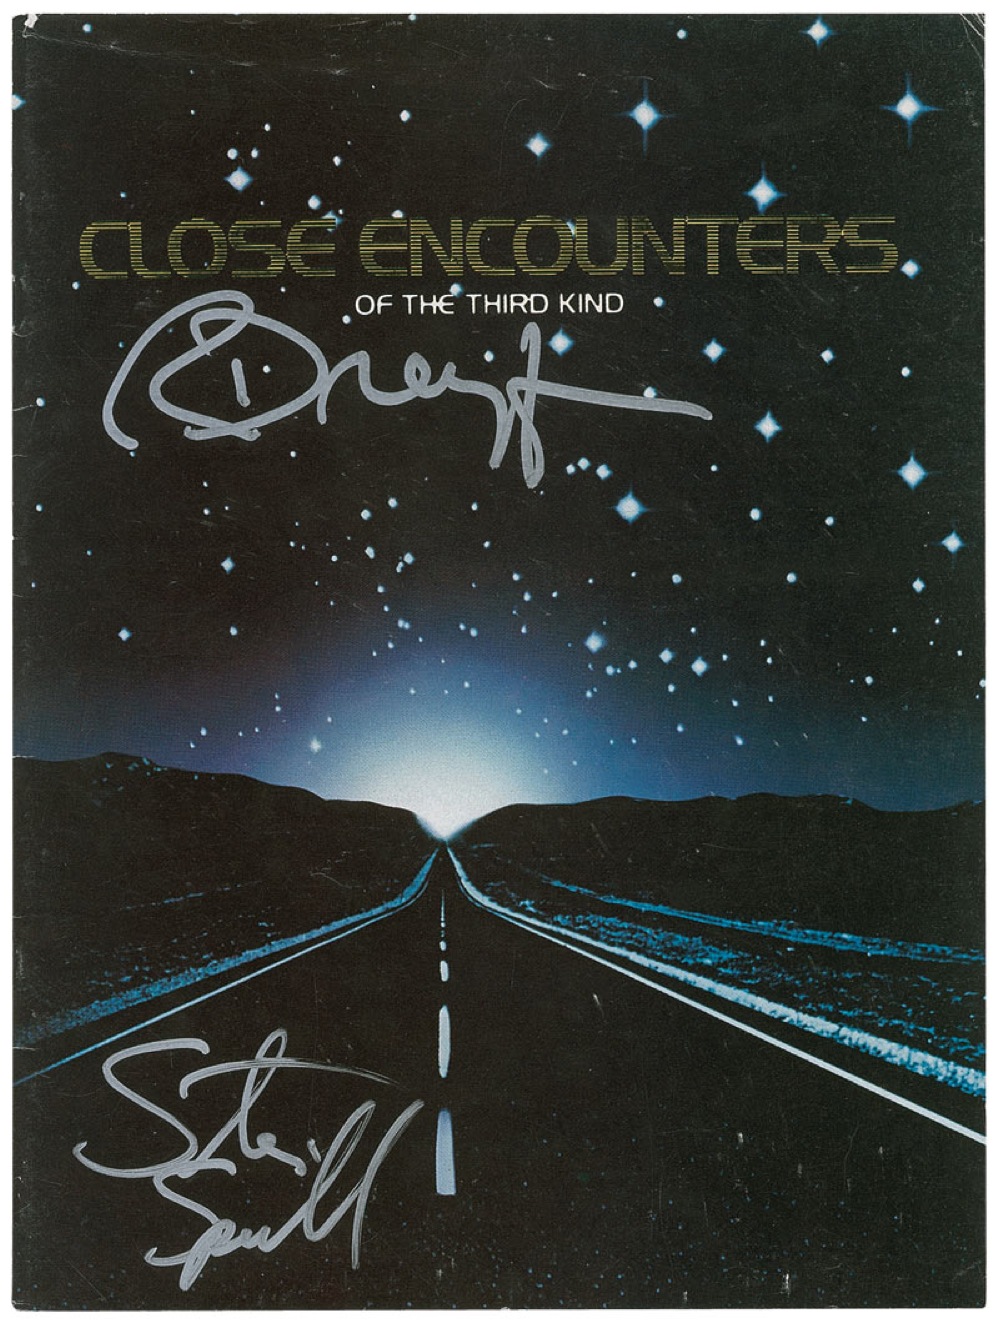 Lot #870 Close Encounters of the Third Kind